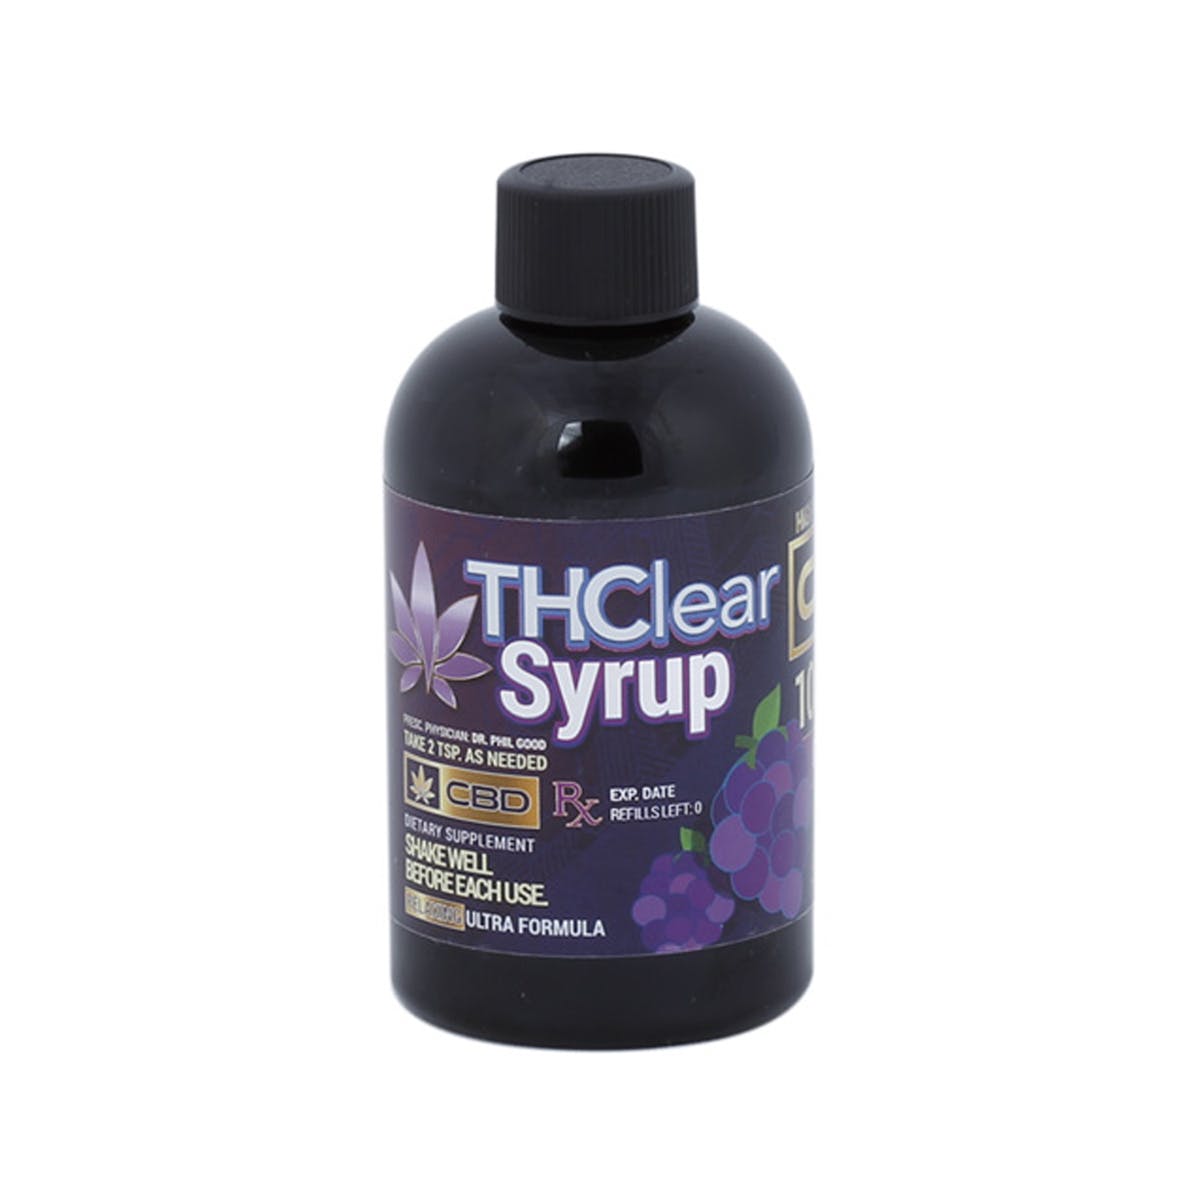 marijuana-dispensaries-mr-steal-your-patients-2419-cap-in-whittier-grape-cbd-syrup-100mg